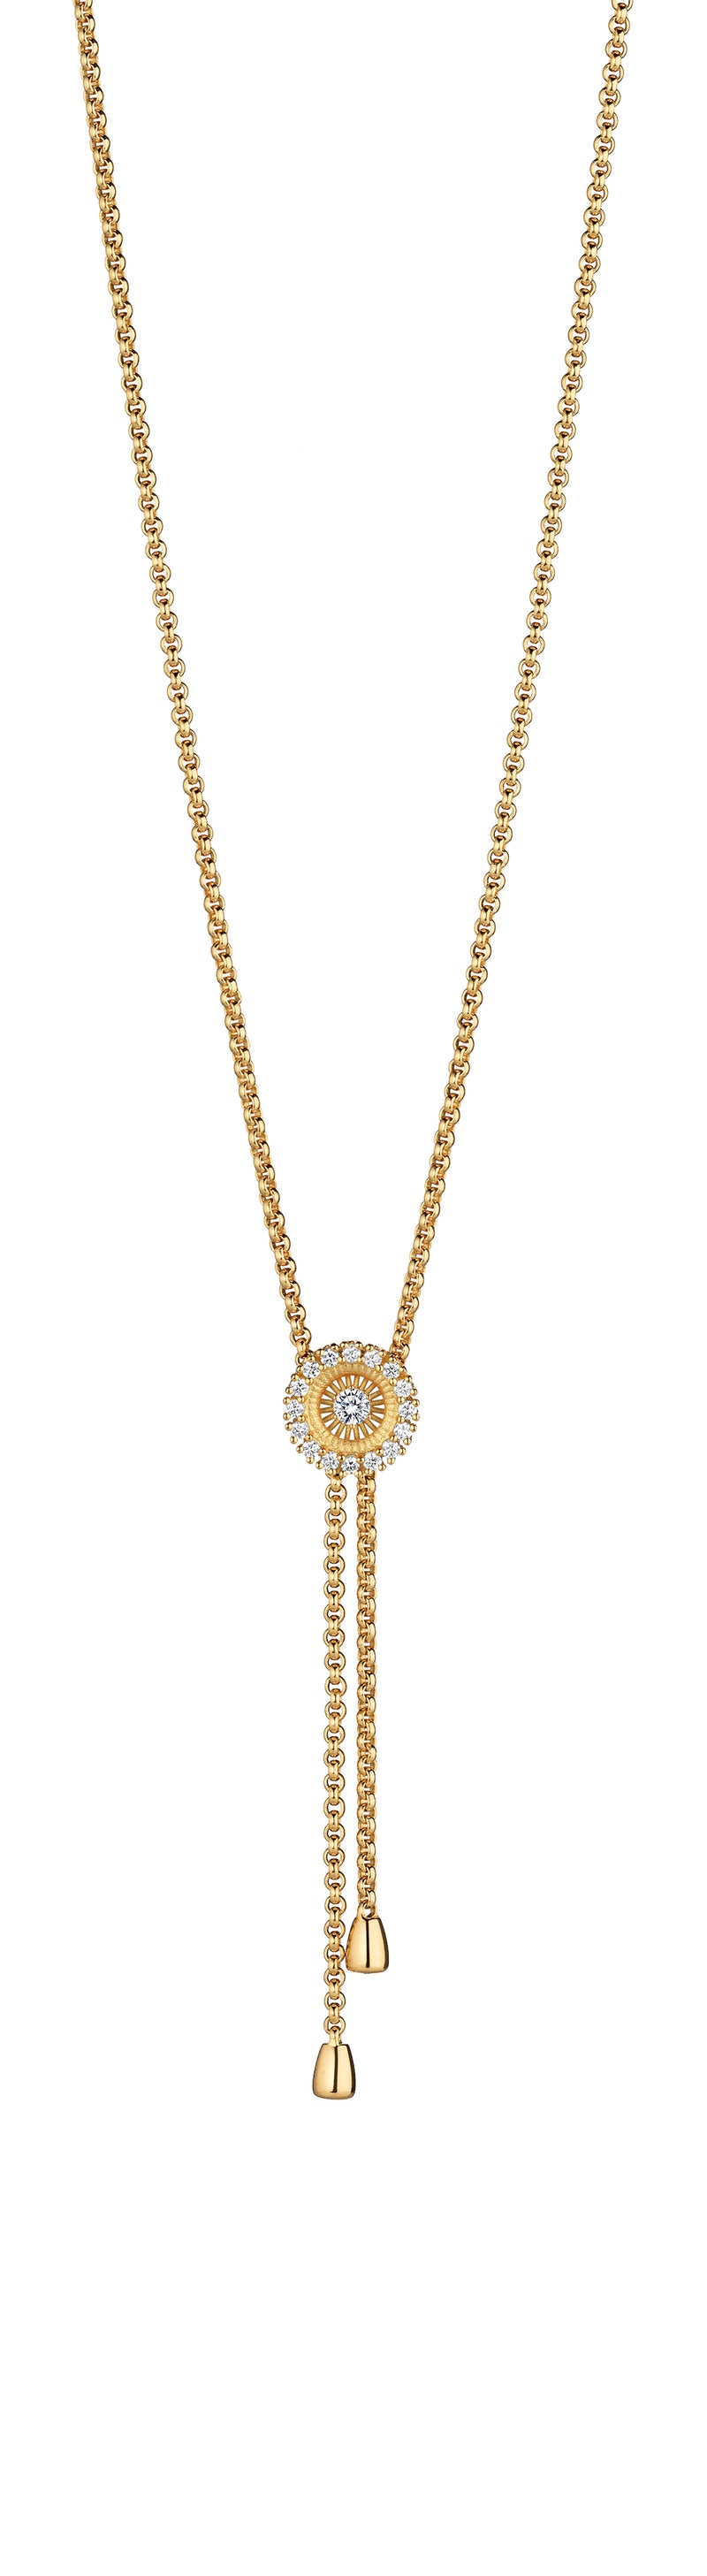 18KT Yellow Gold Swing Boho Y-Necklace